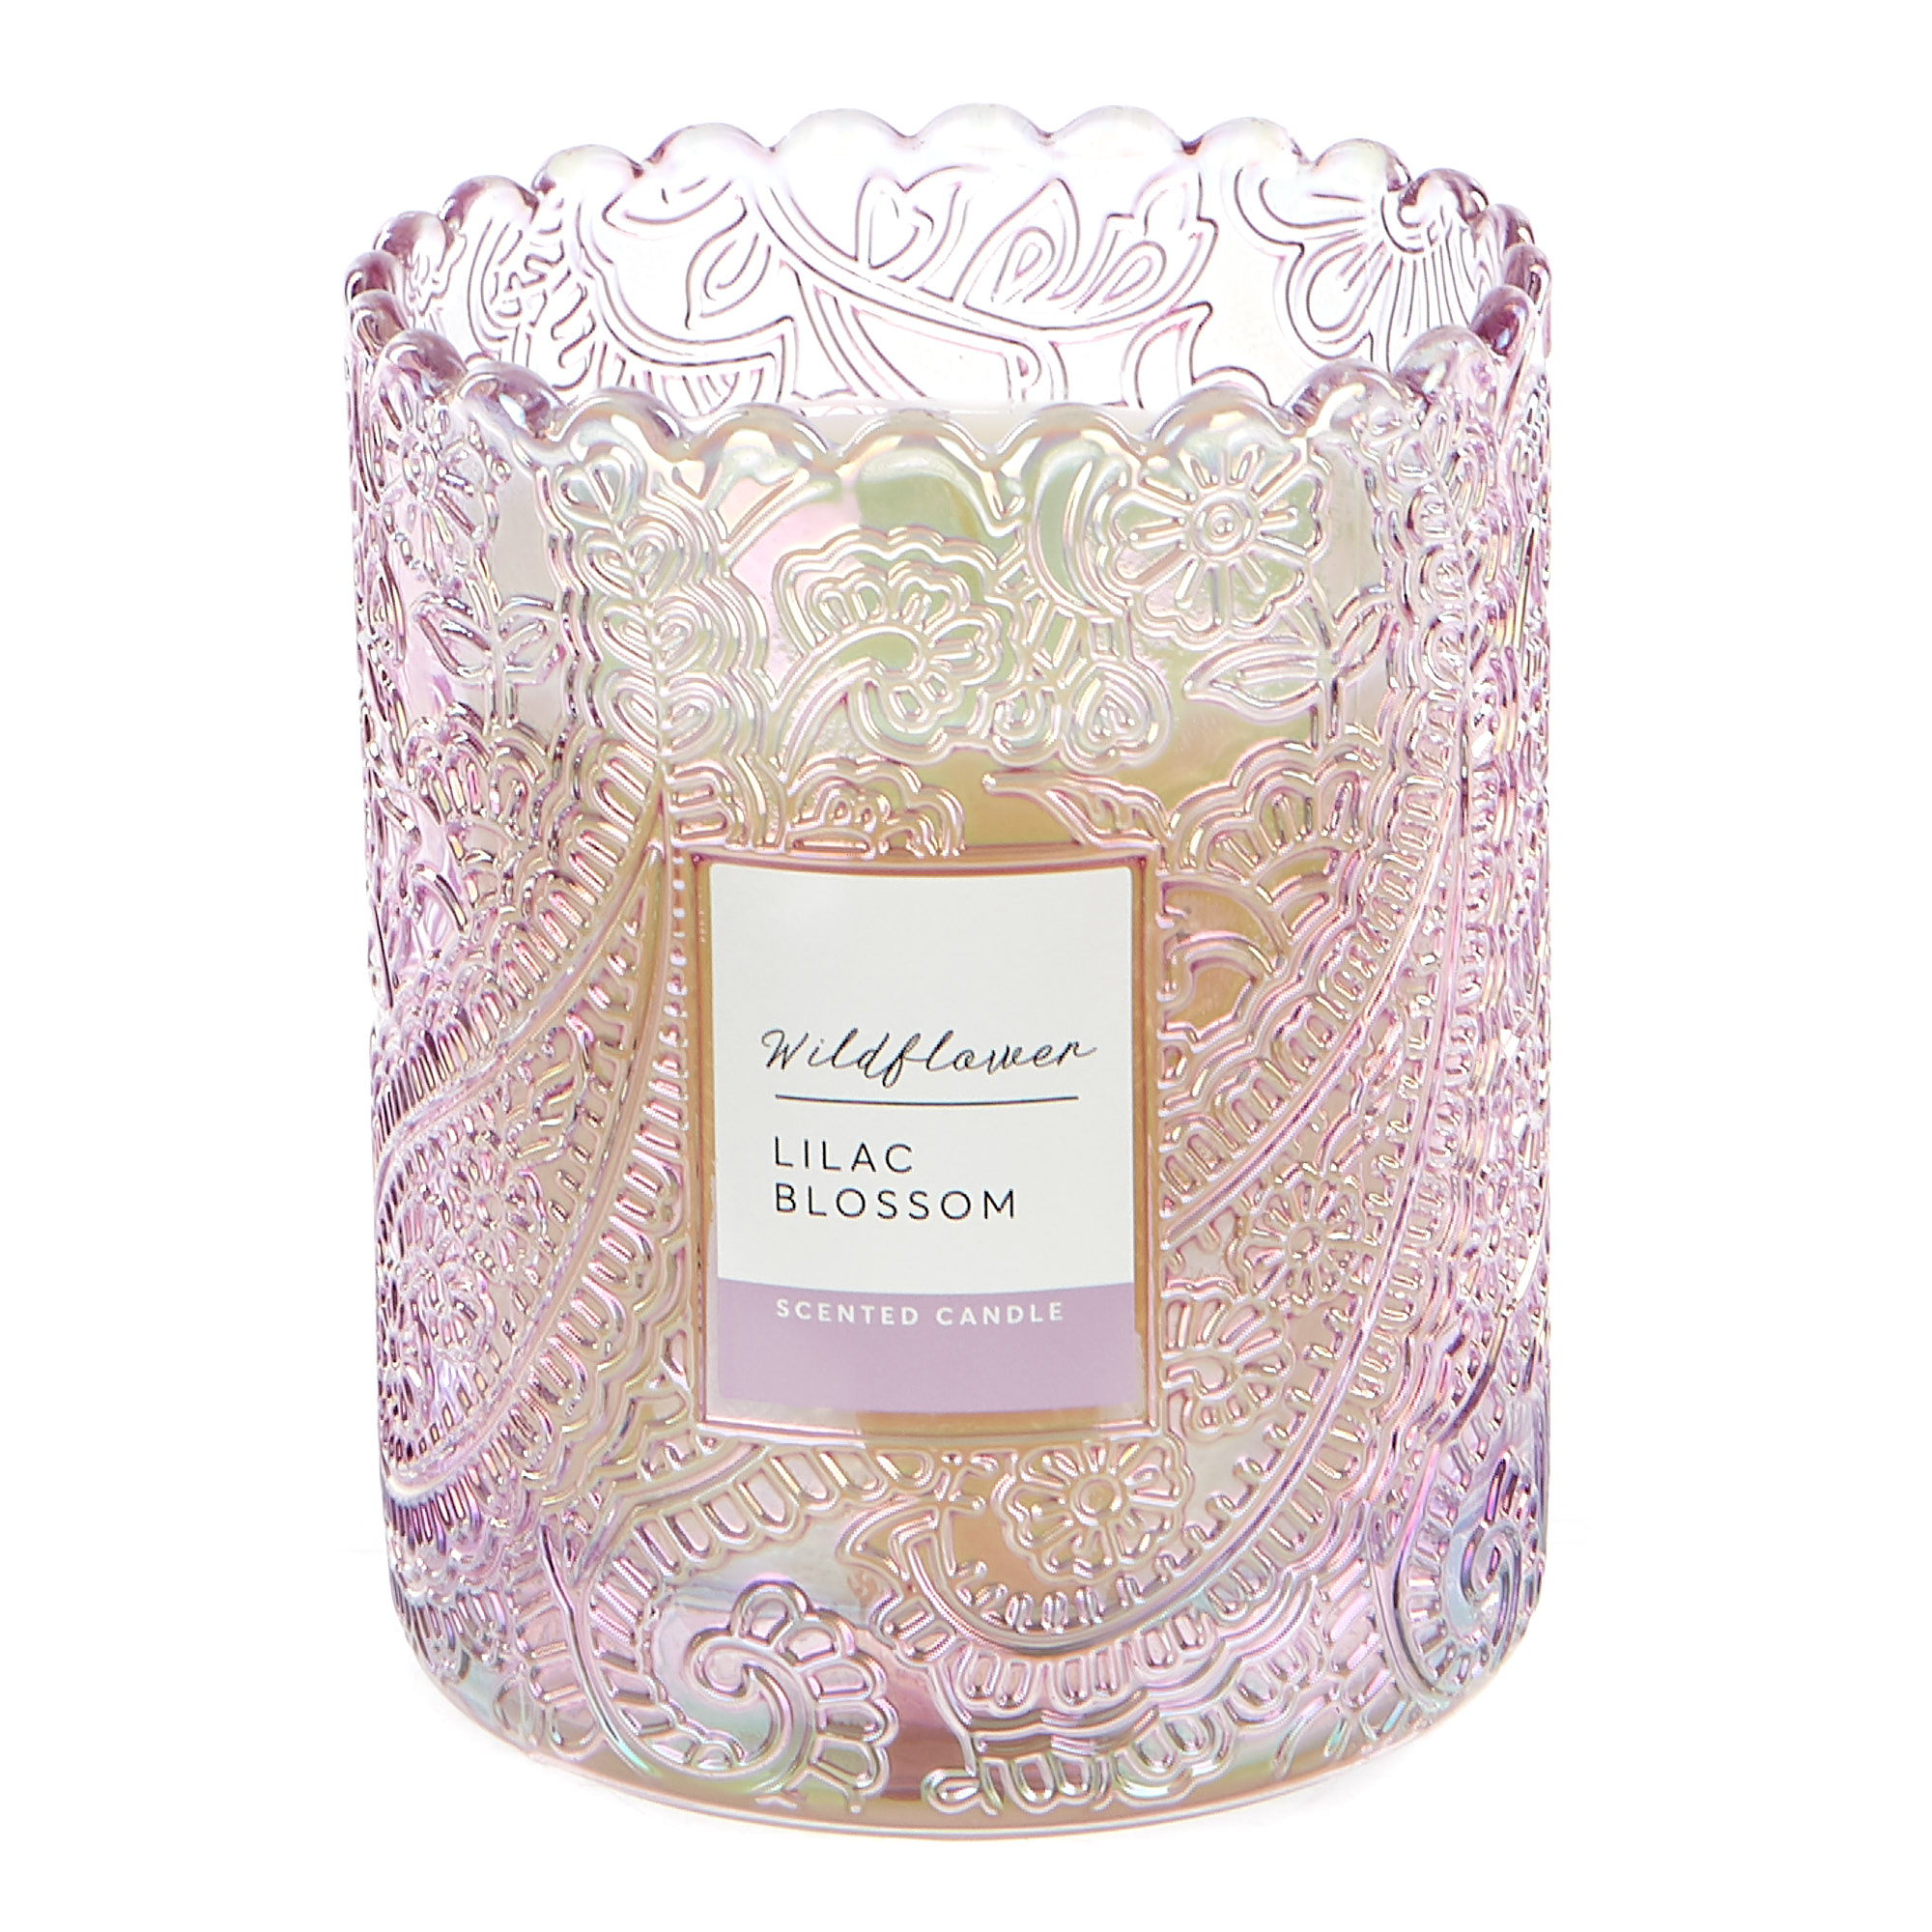 Wildflower Lilac Blossom Scented Candle